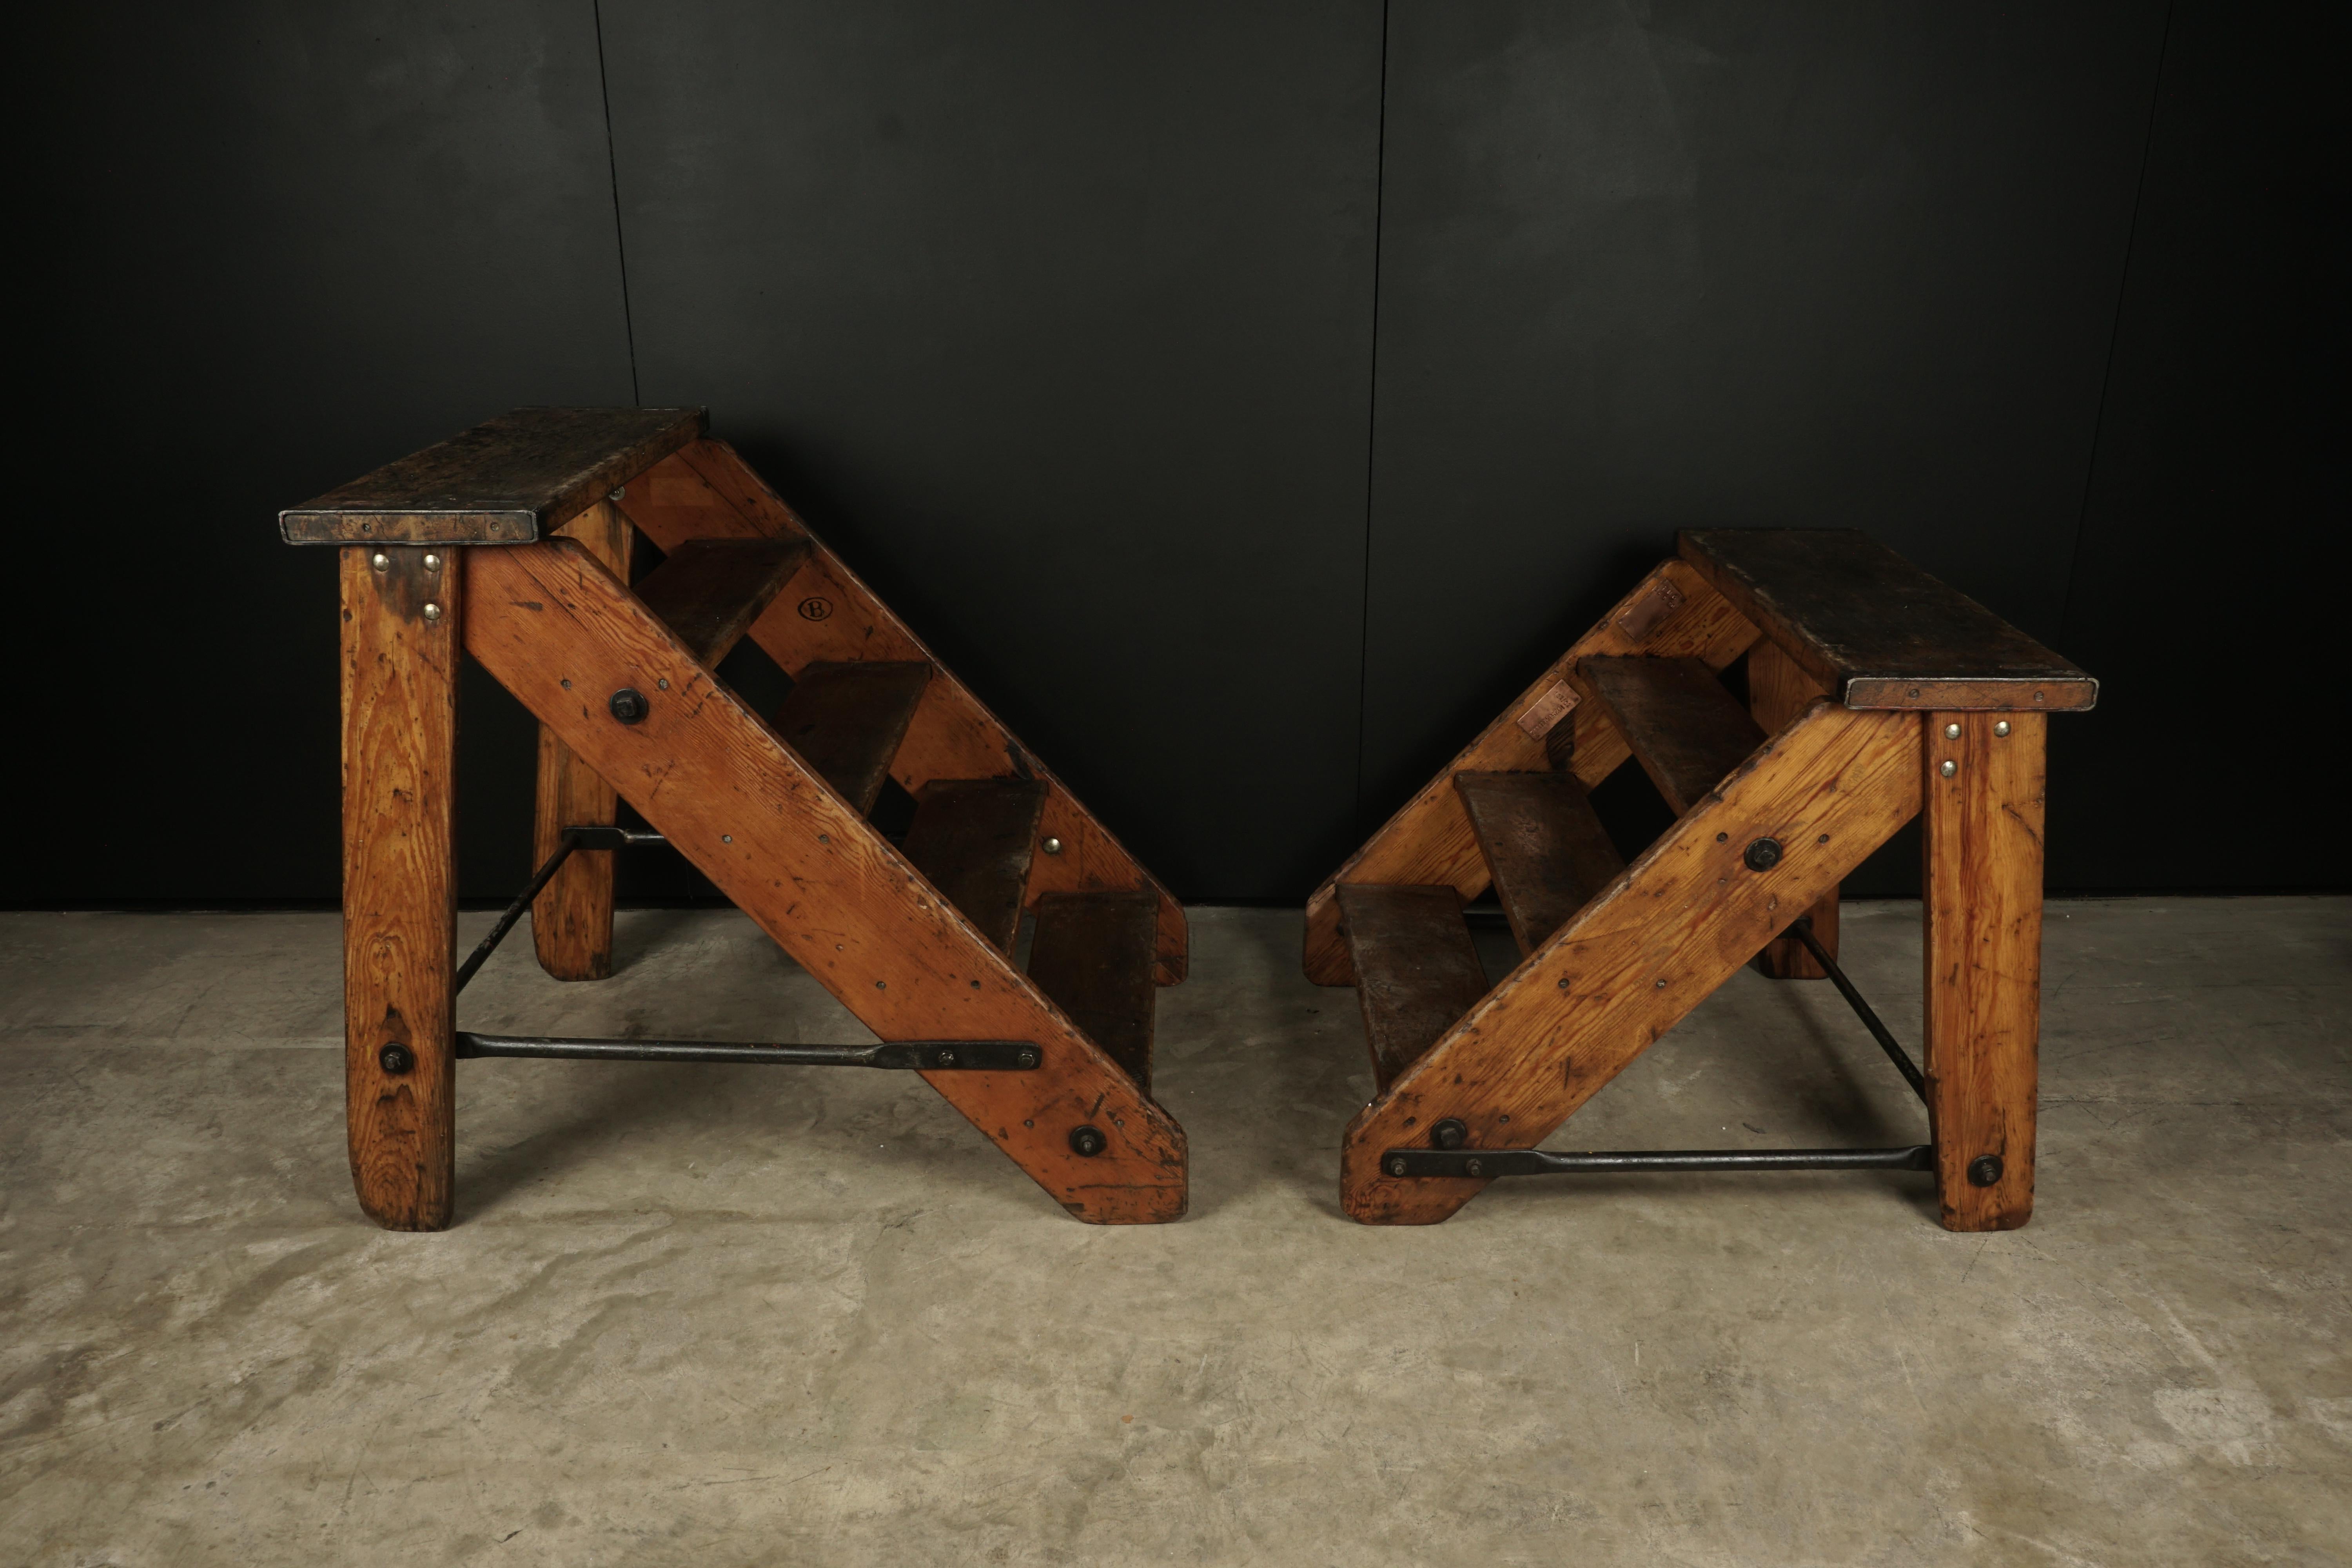 European Set of Two Vintage Step Ladders from Belgium, circa 1940